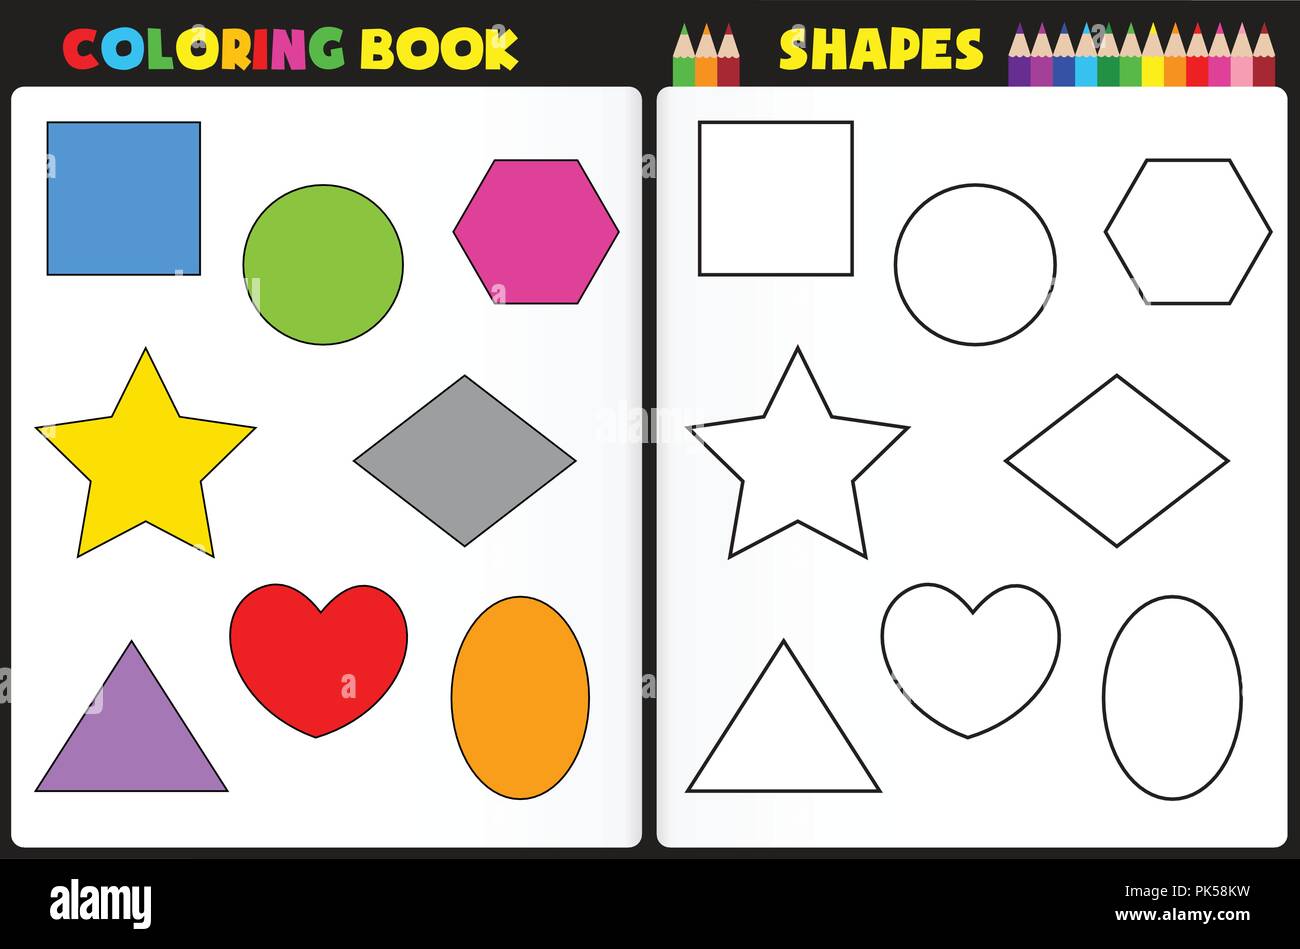 Coloring book page for kids with colorful shapes and sketches to ...